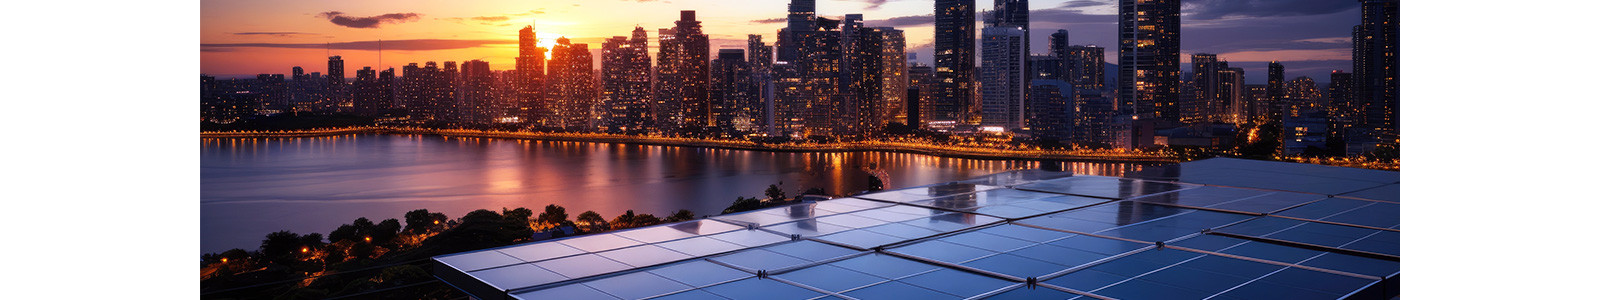 A view of city and solar panels